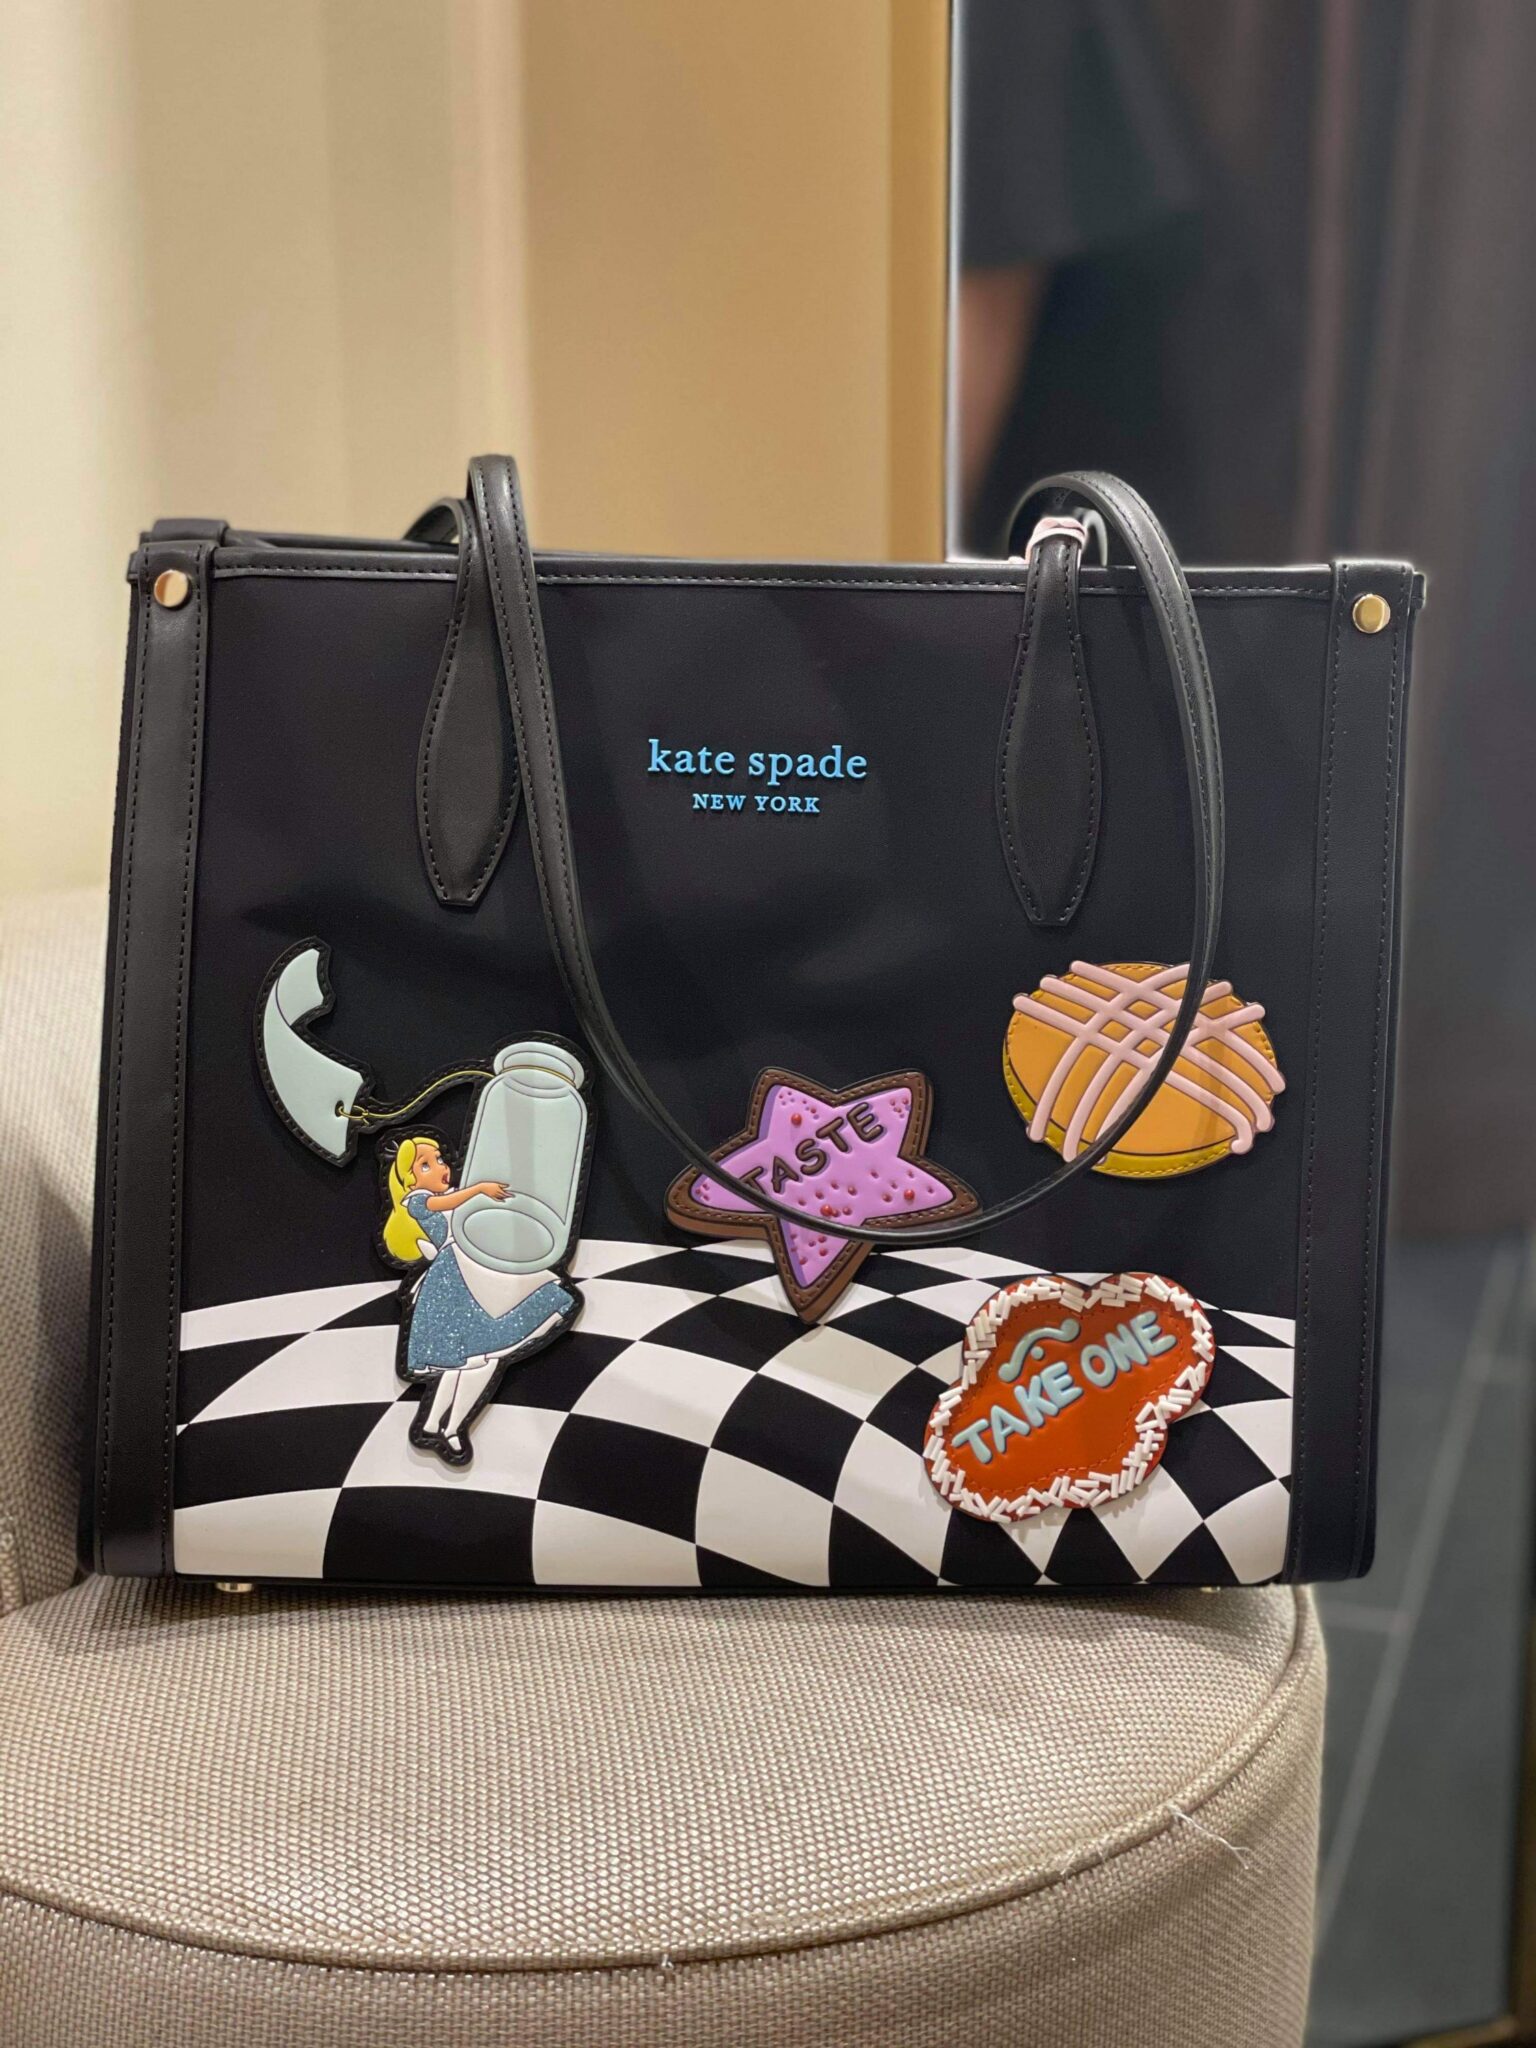 more-of-the-new-kate-spade-collection-is-trickling-into-disney-springs